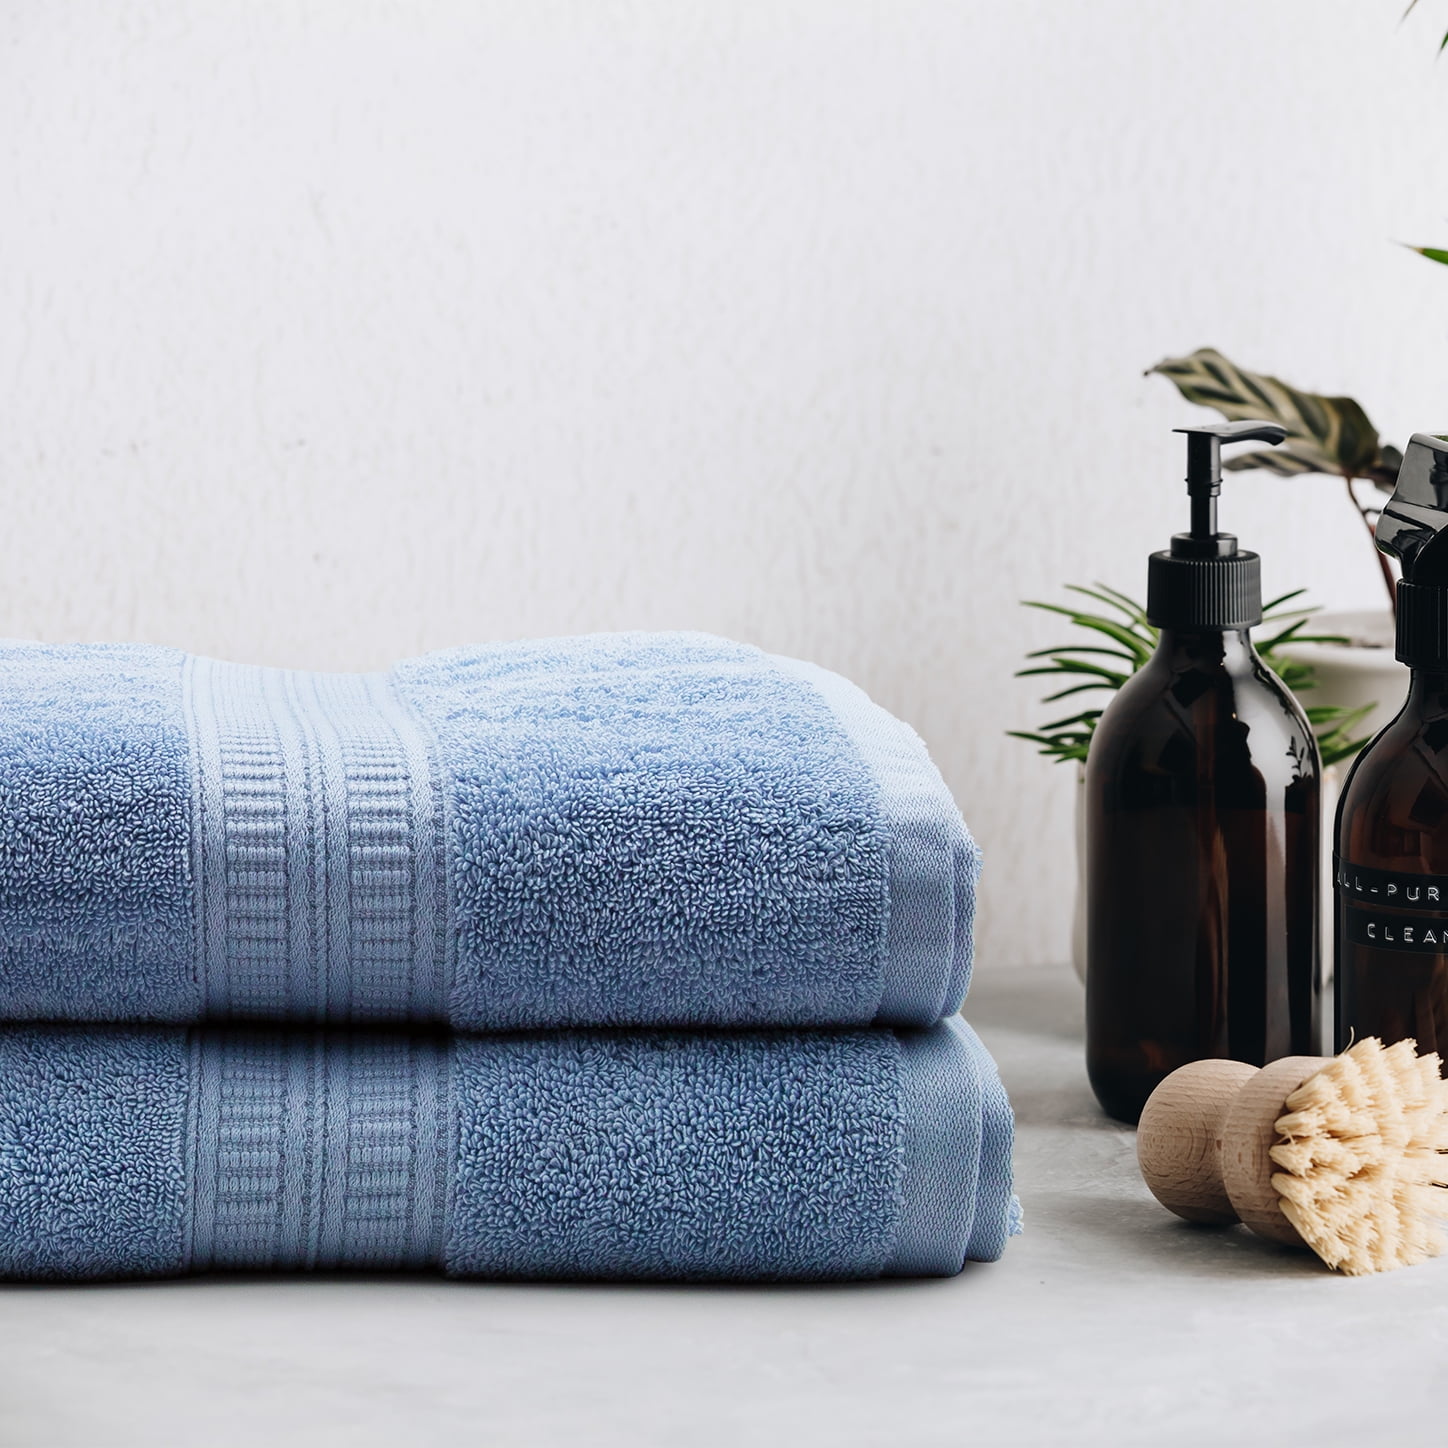 Plush Antimicrobial Towels in 100% Supima Cotton